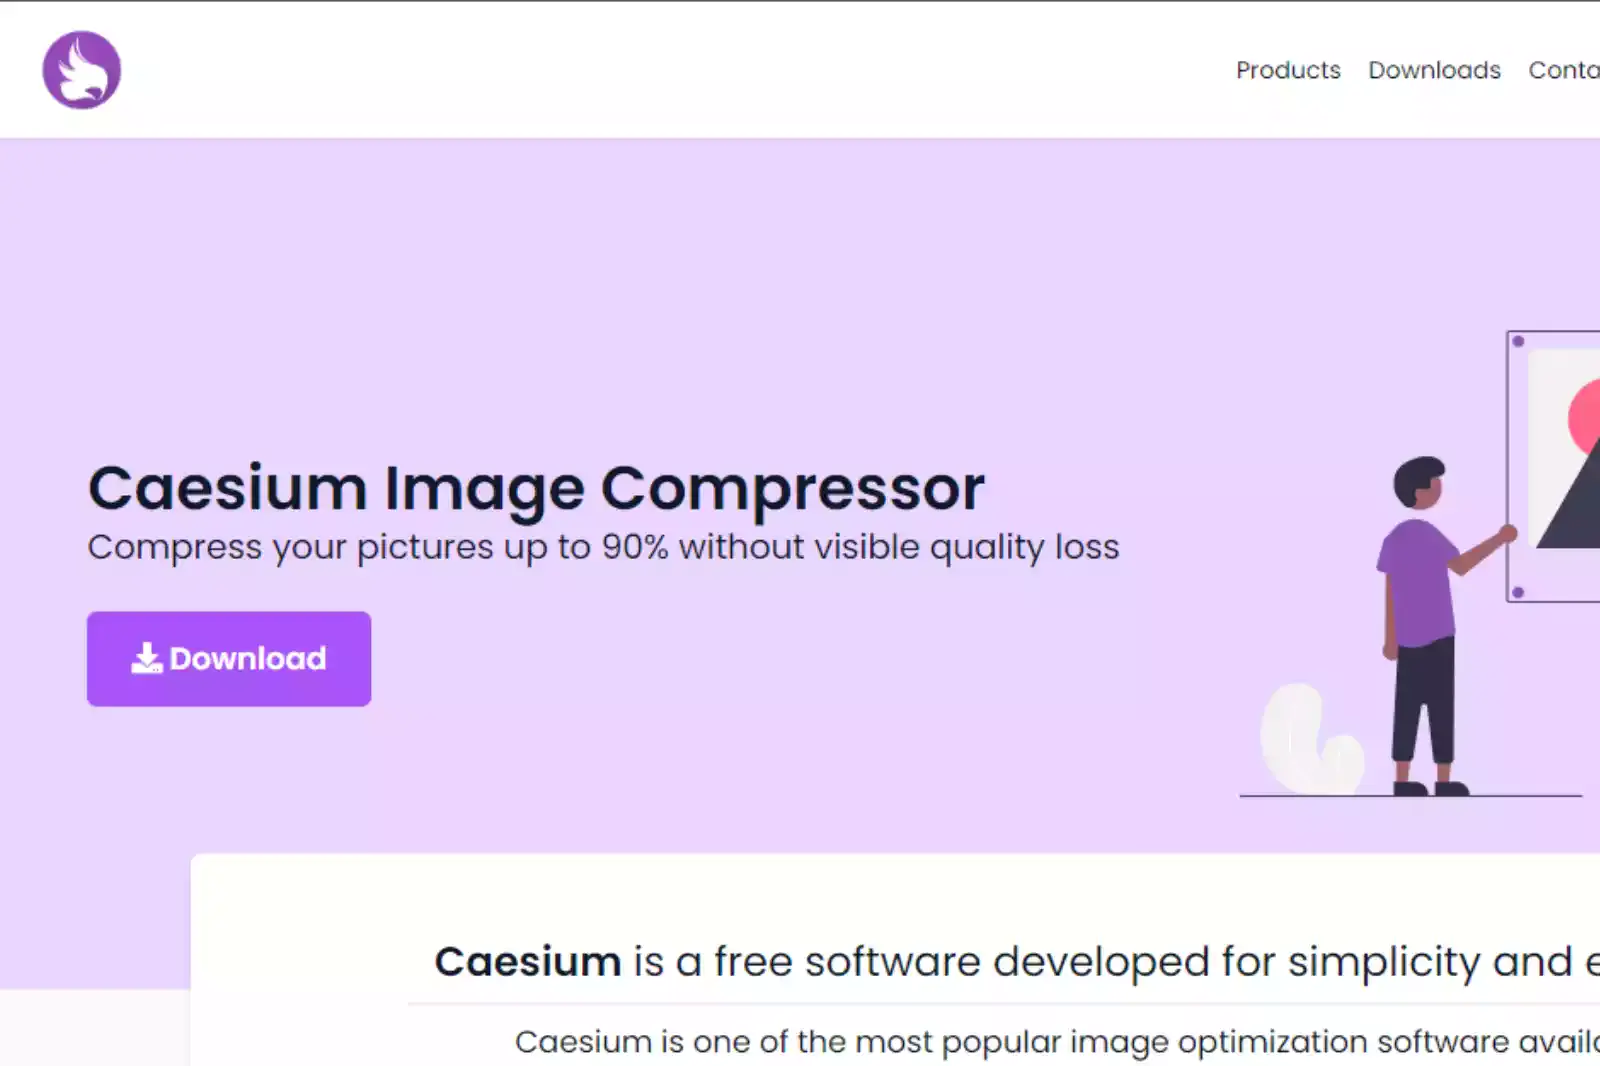 Home page of Ceasium image compressor